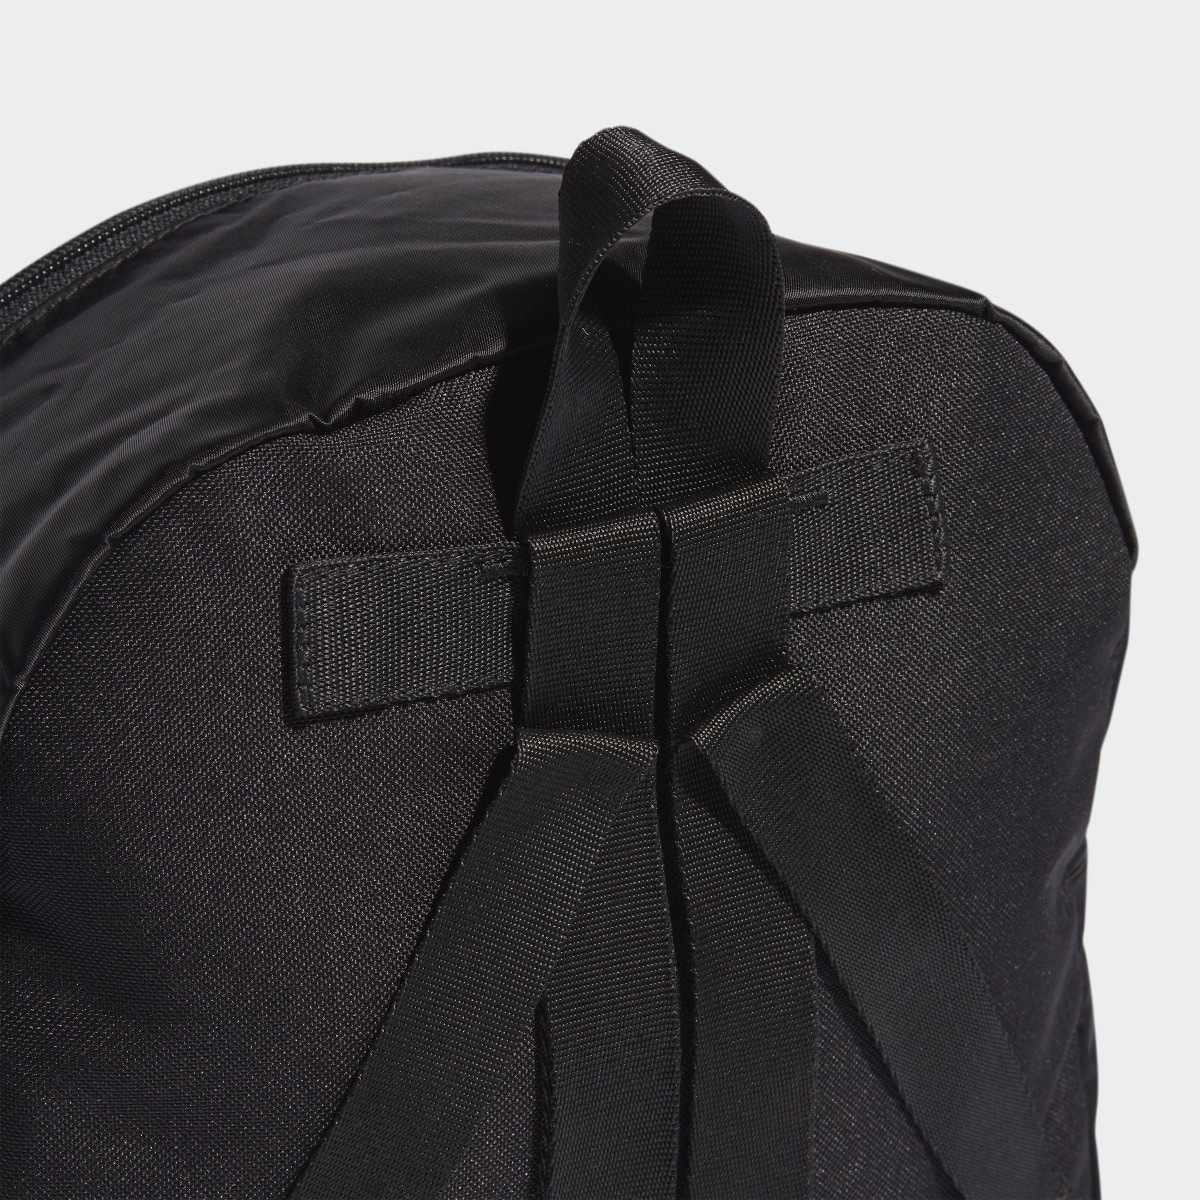 Adidas T4H XS Backpack. 7